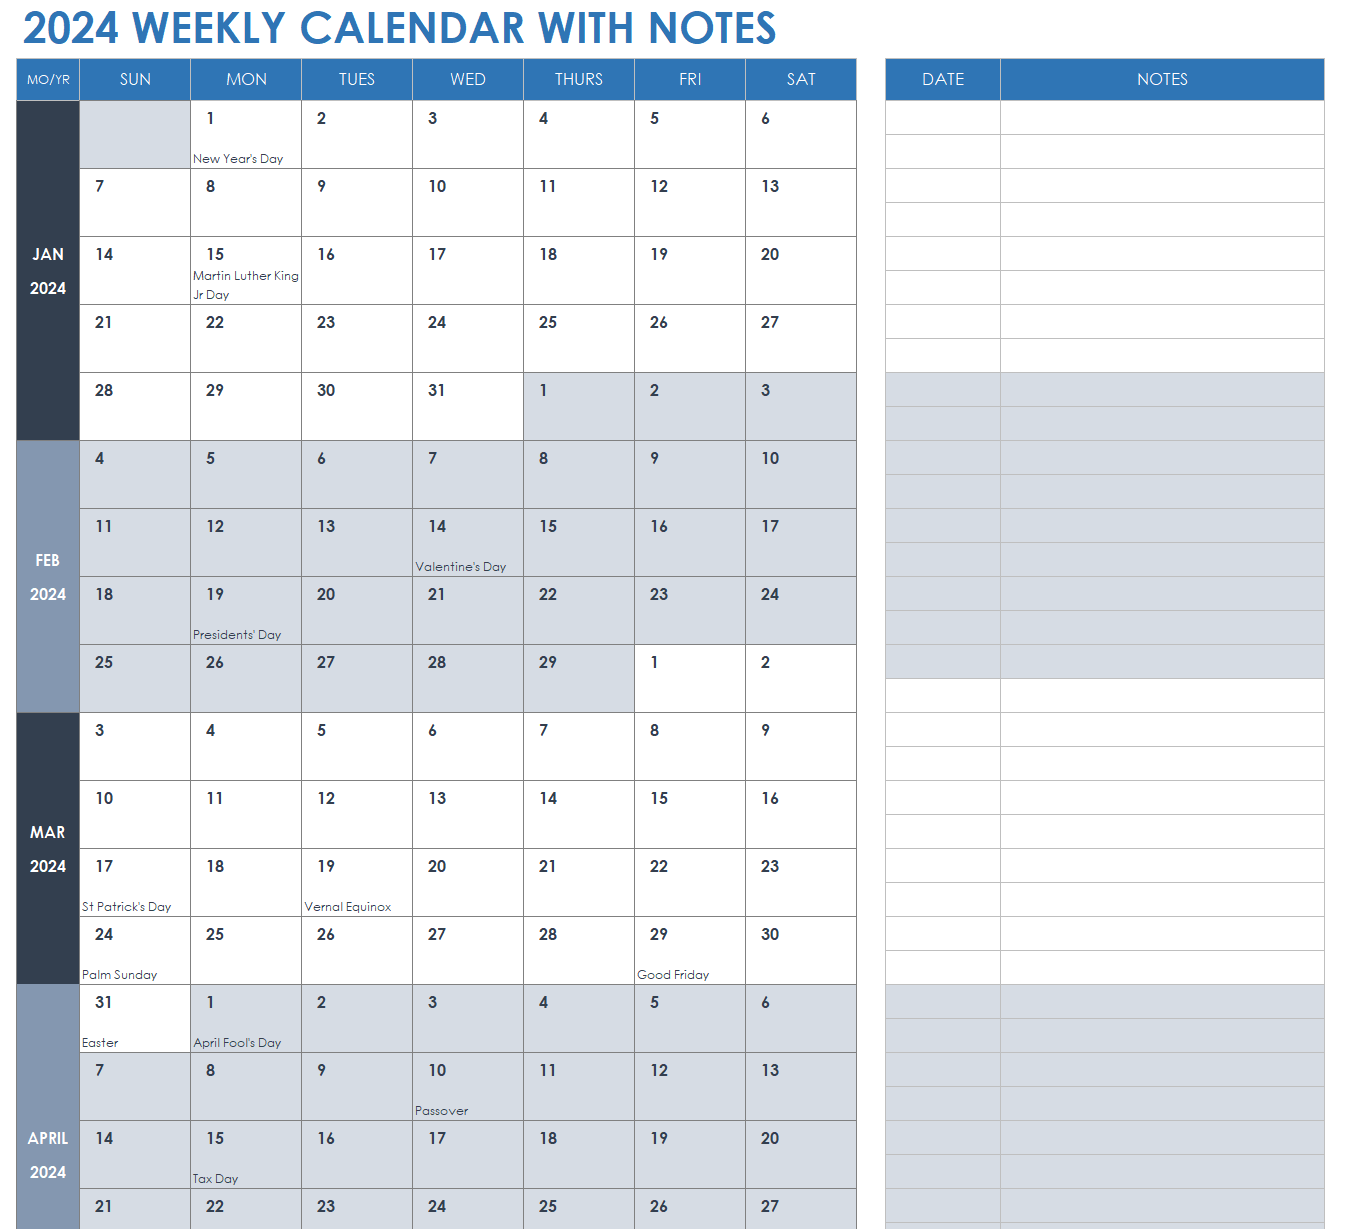 2024 Weekly Calendar with Notes